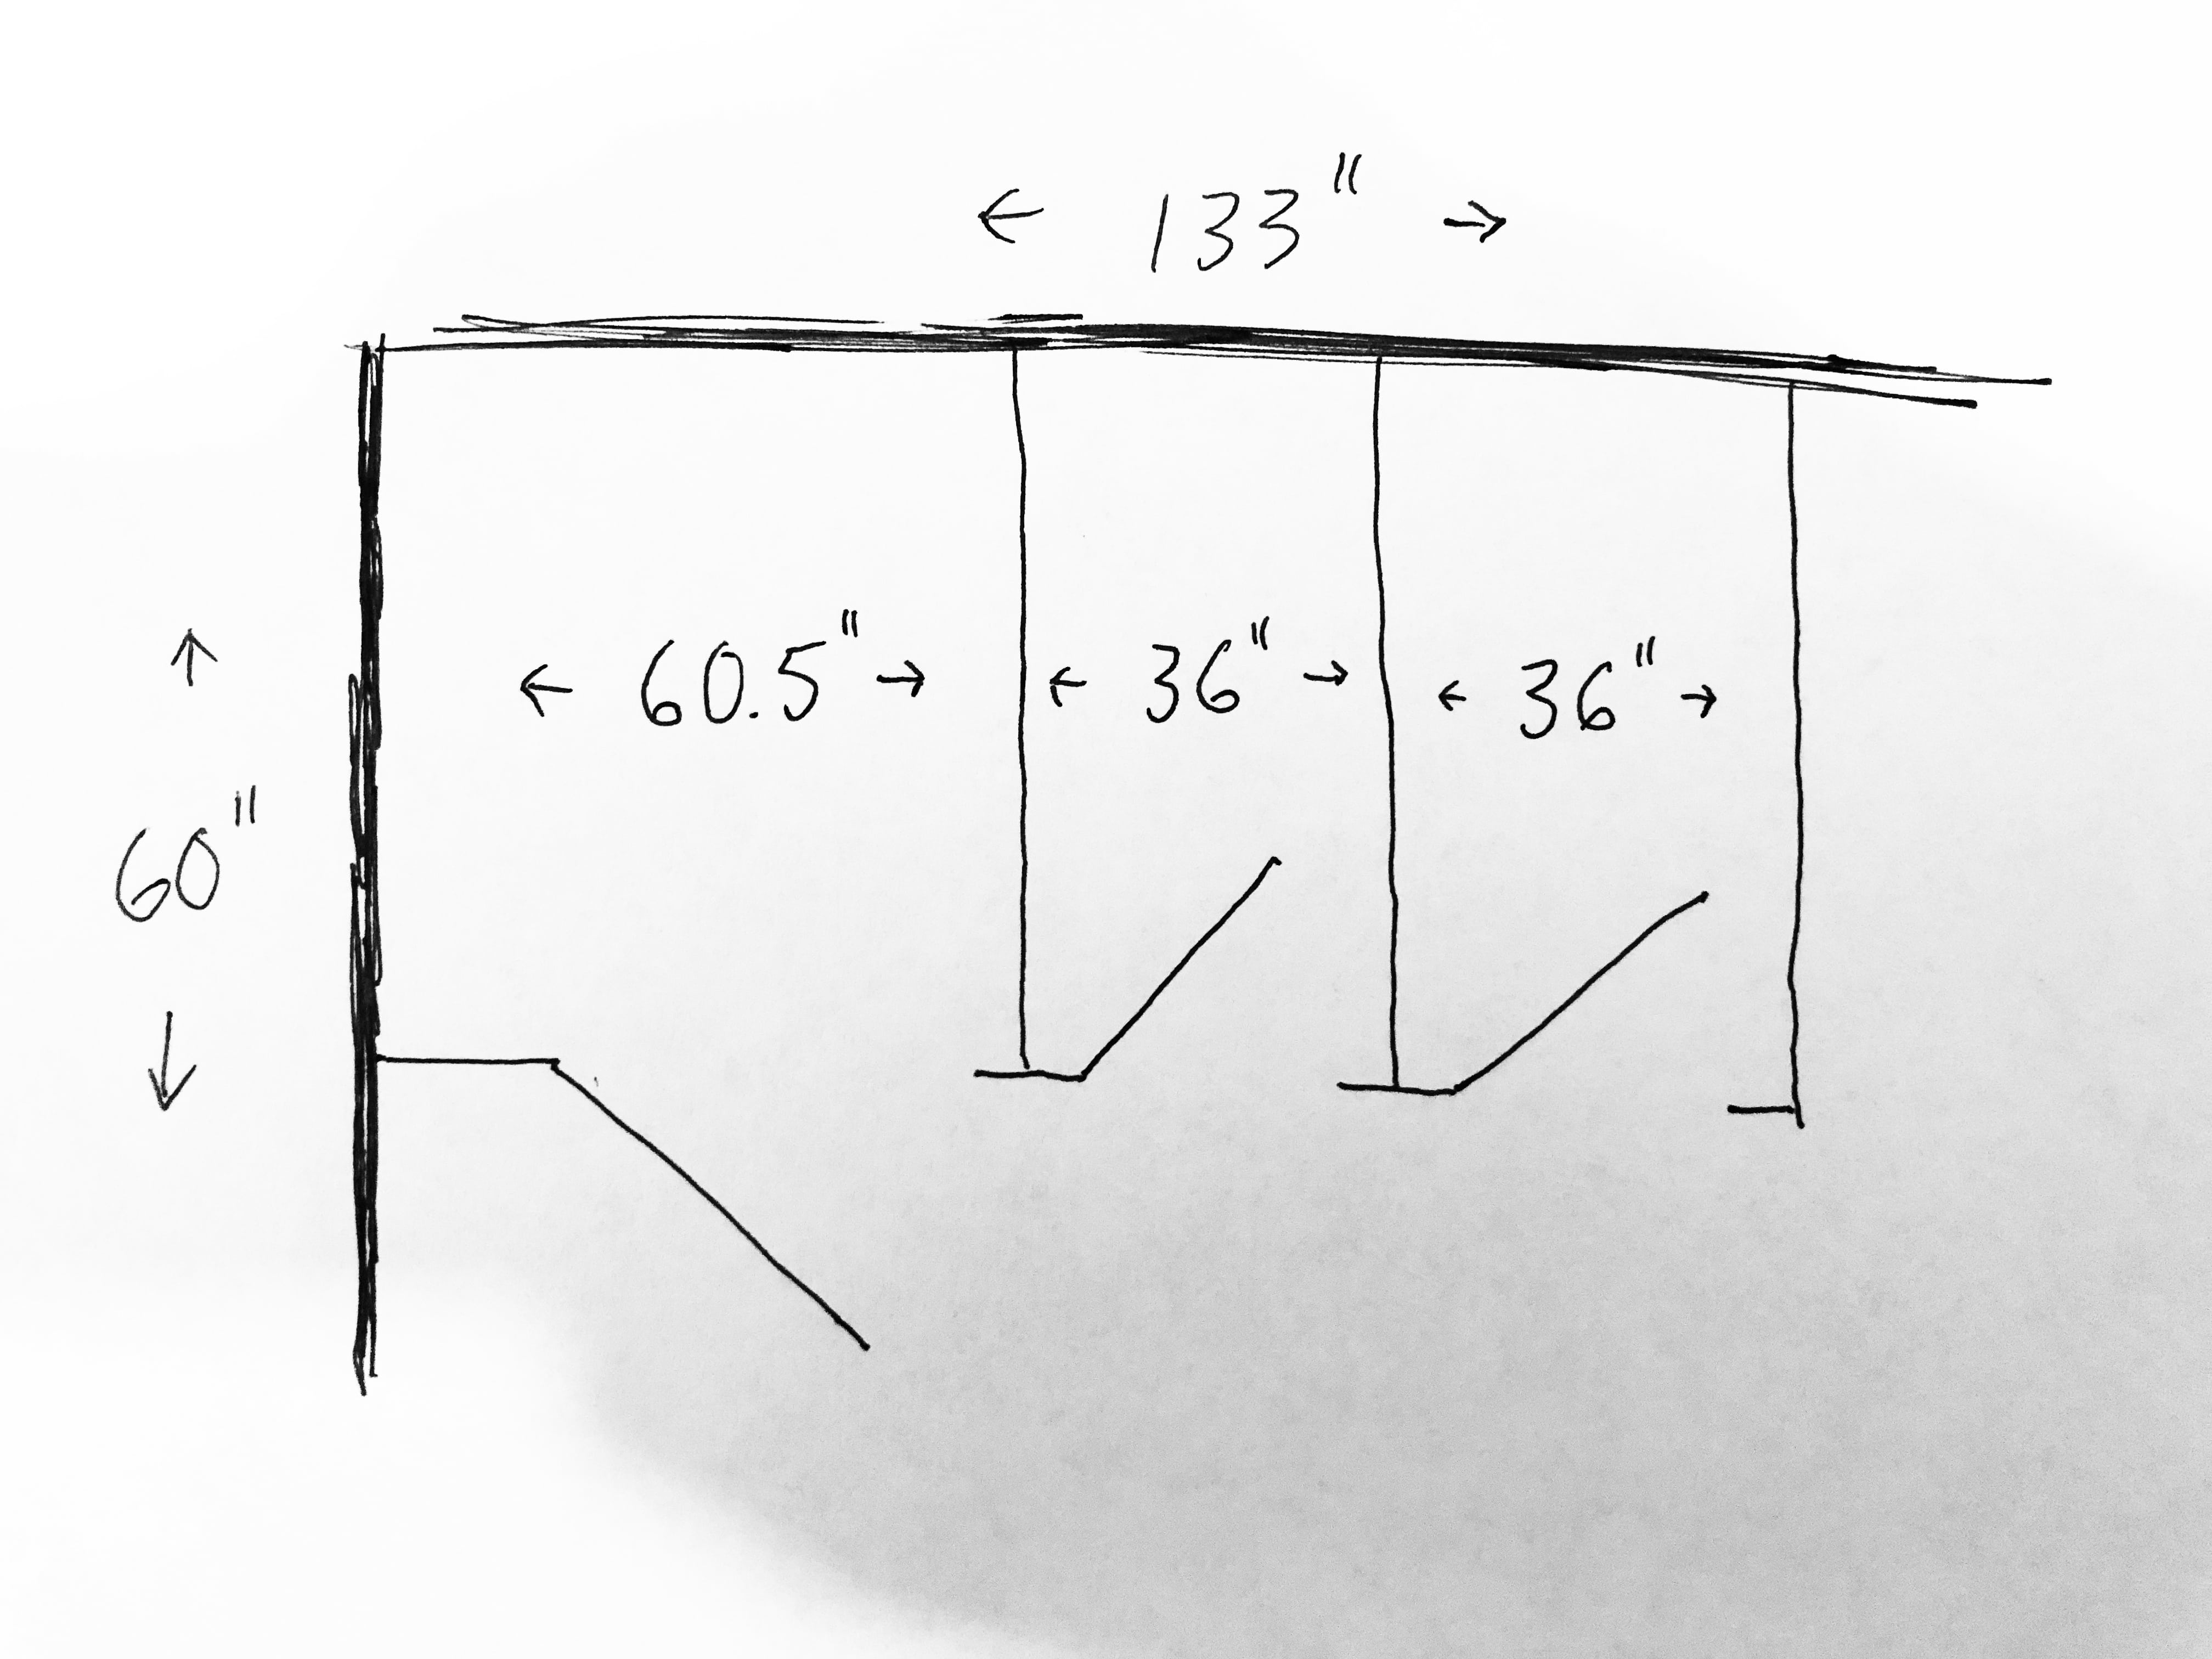 Bathroom and stall measurements drawing